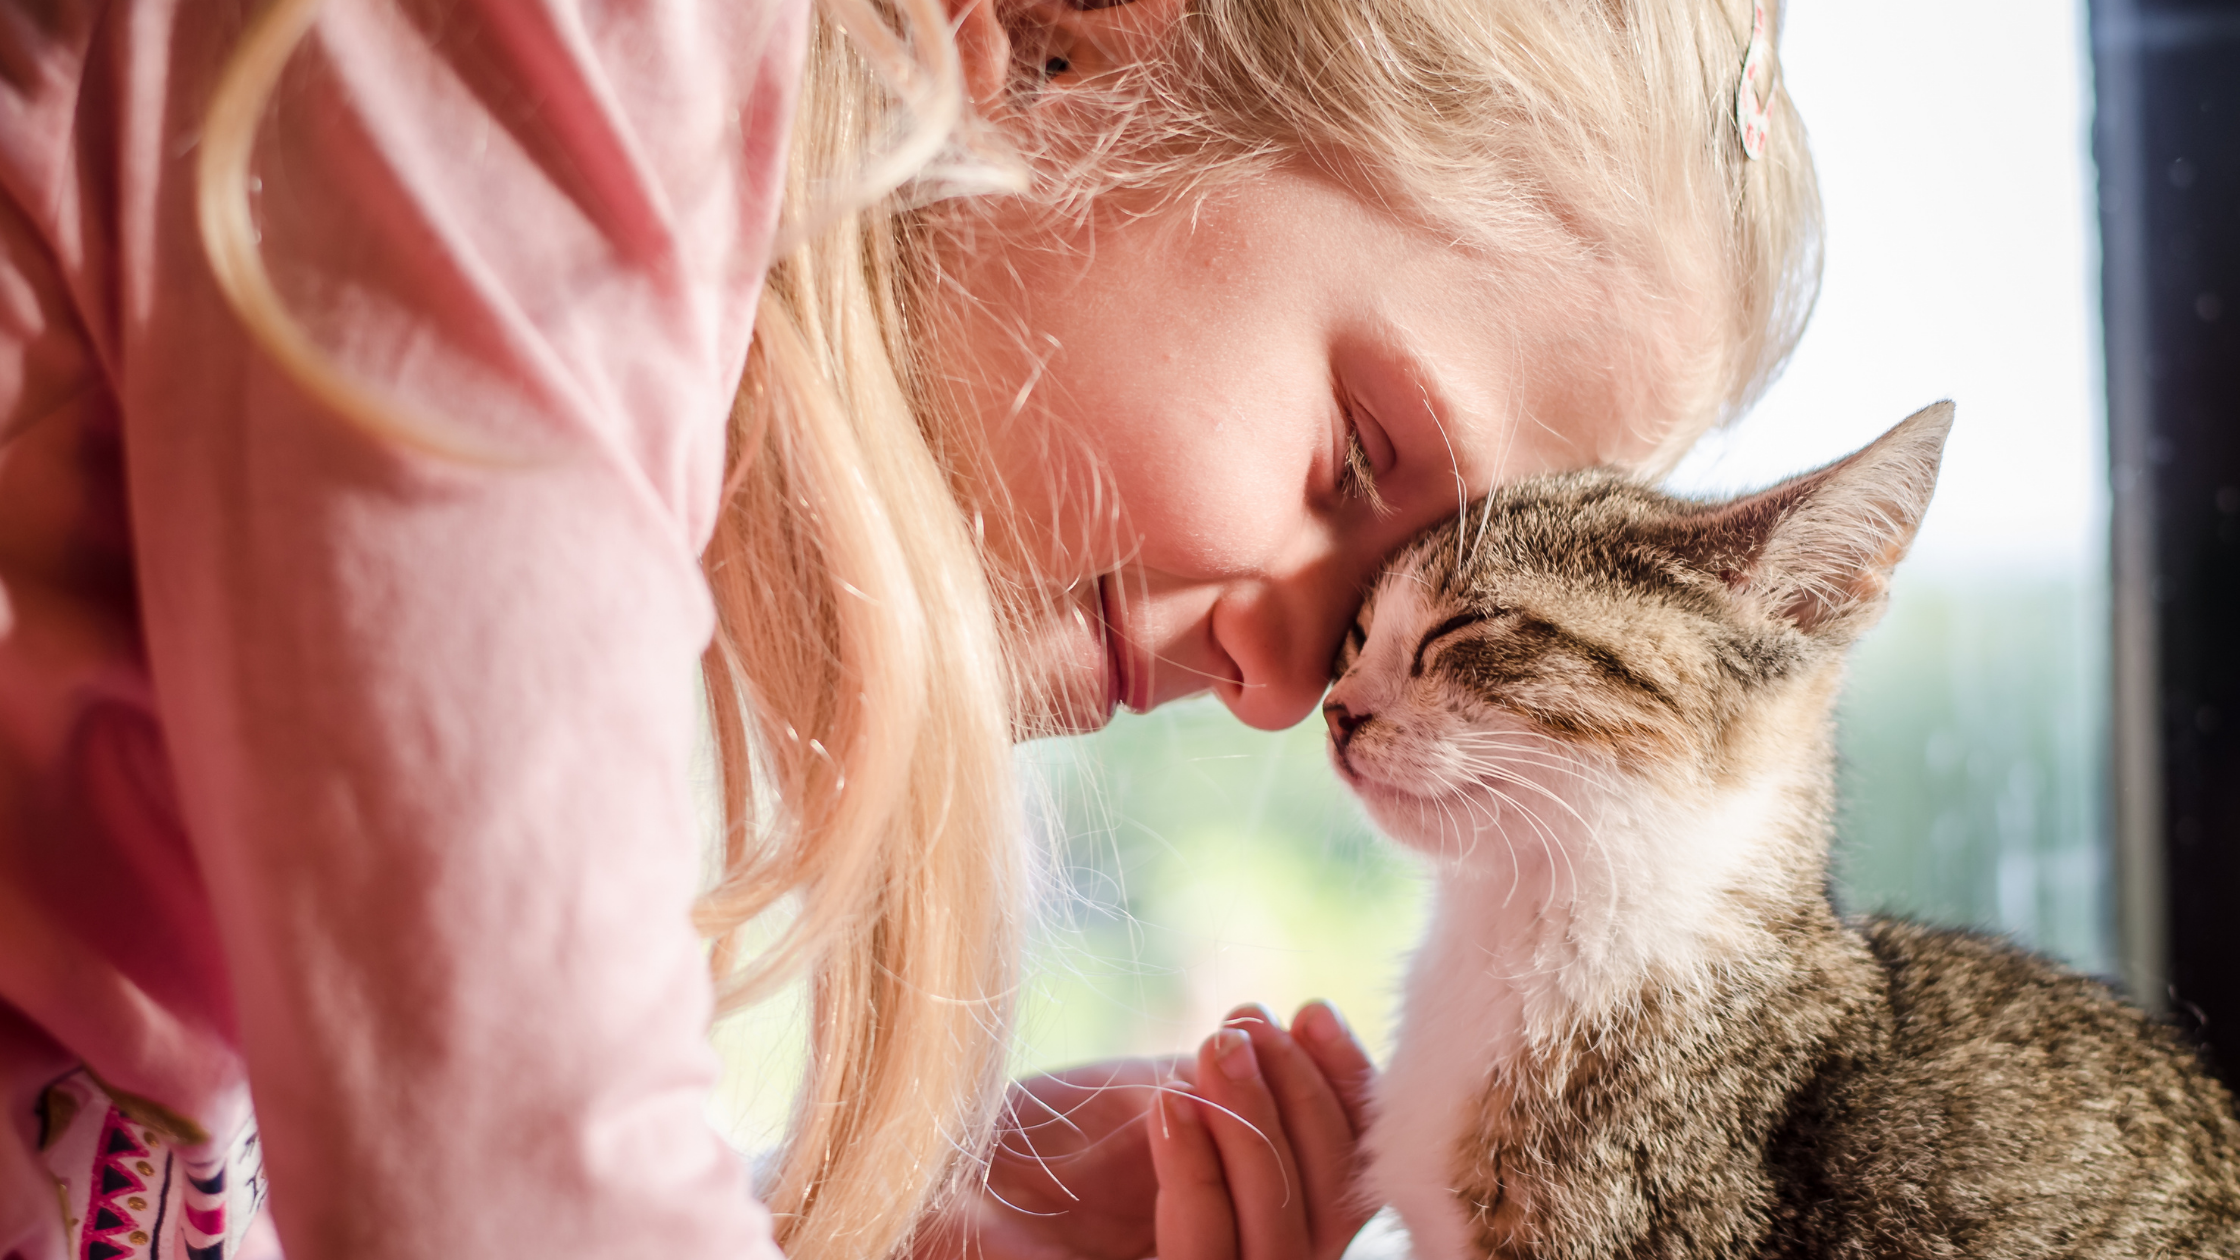 12 Signs Your Cat Is Healthy And Happy